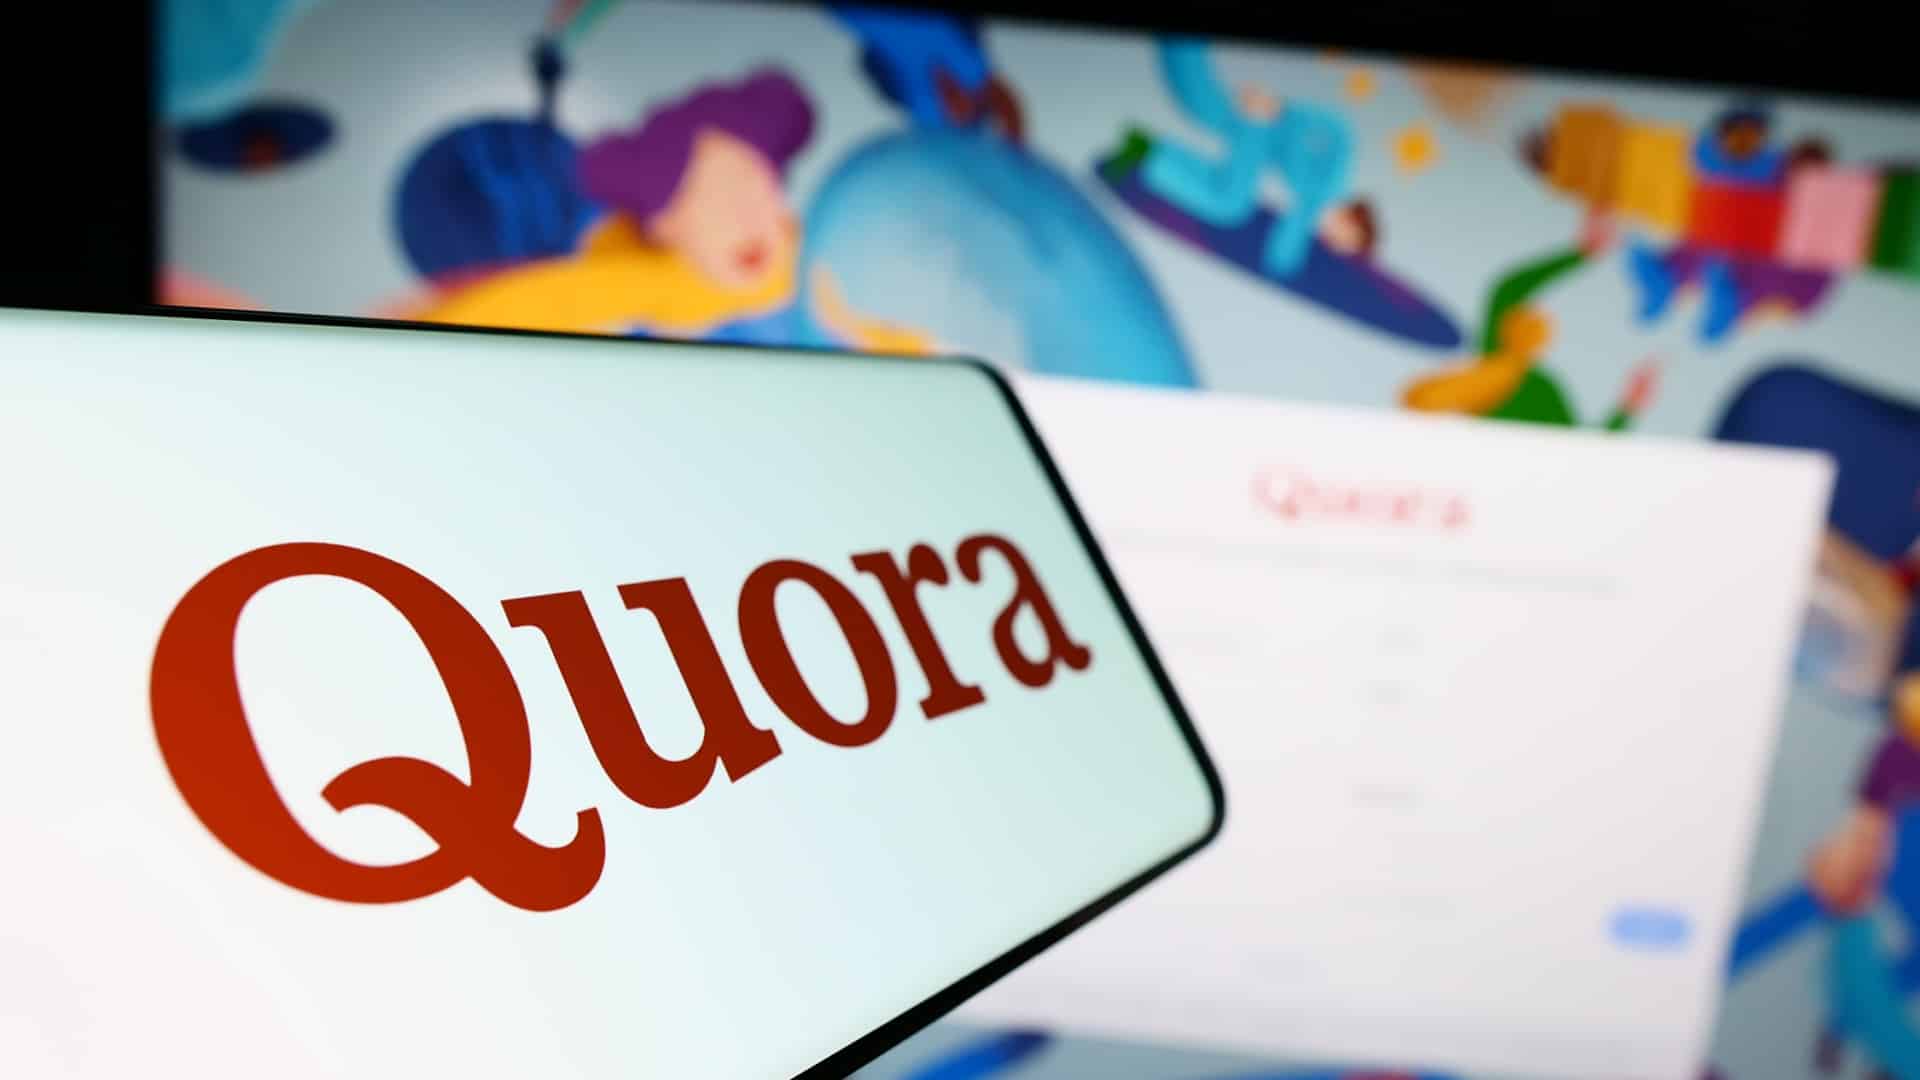 How to use Quora for SEO and research